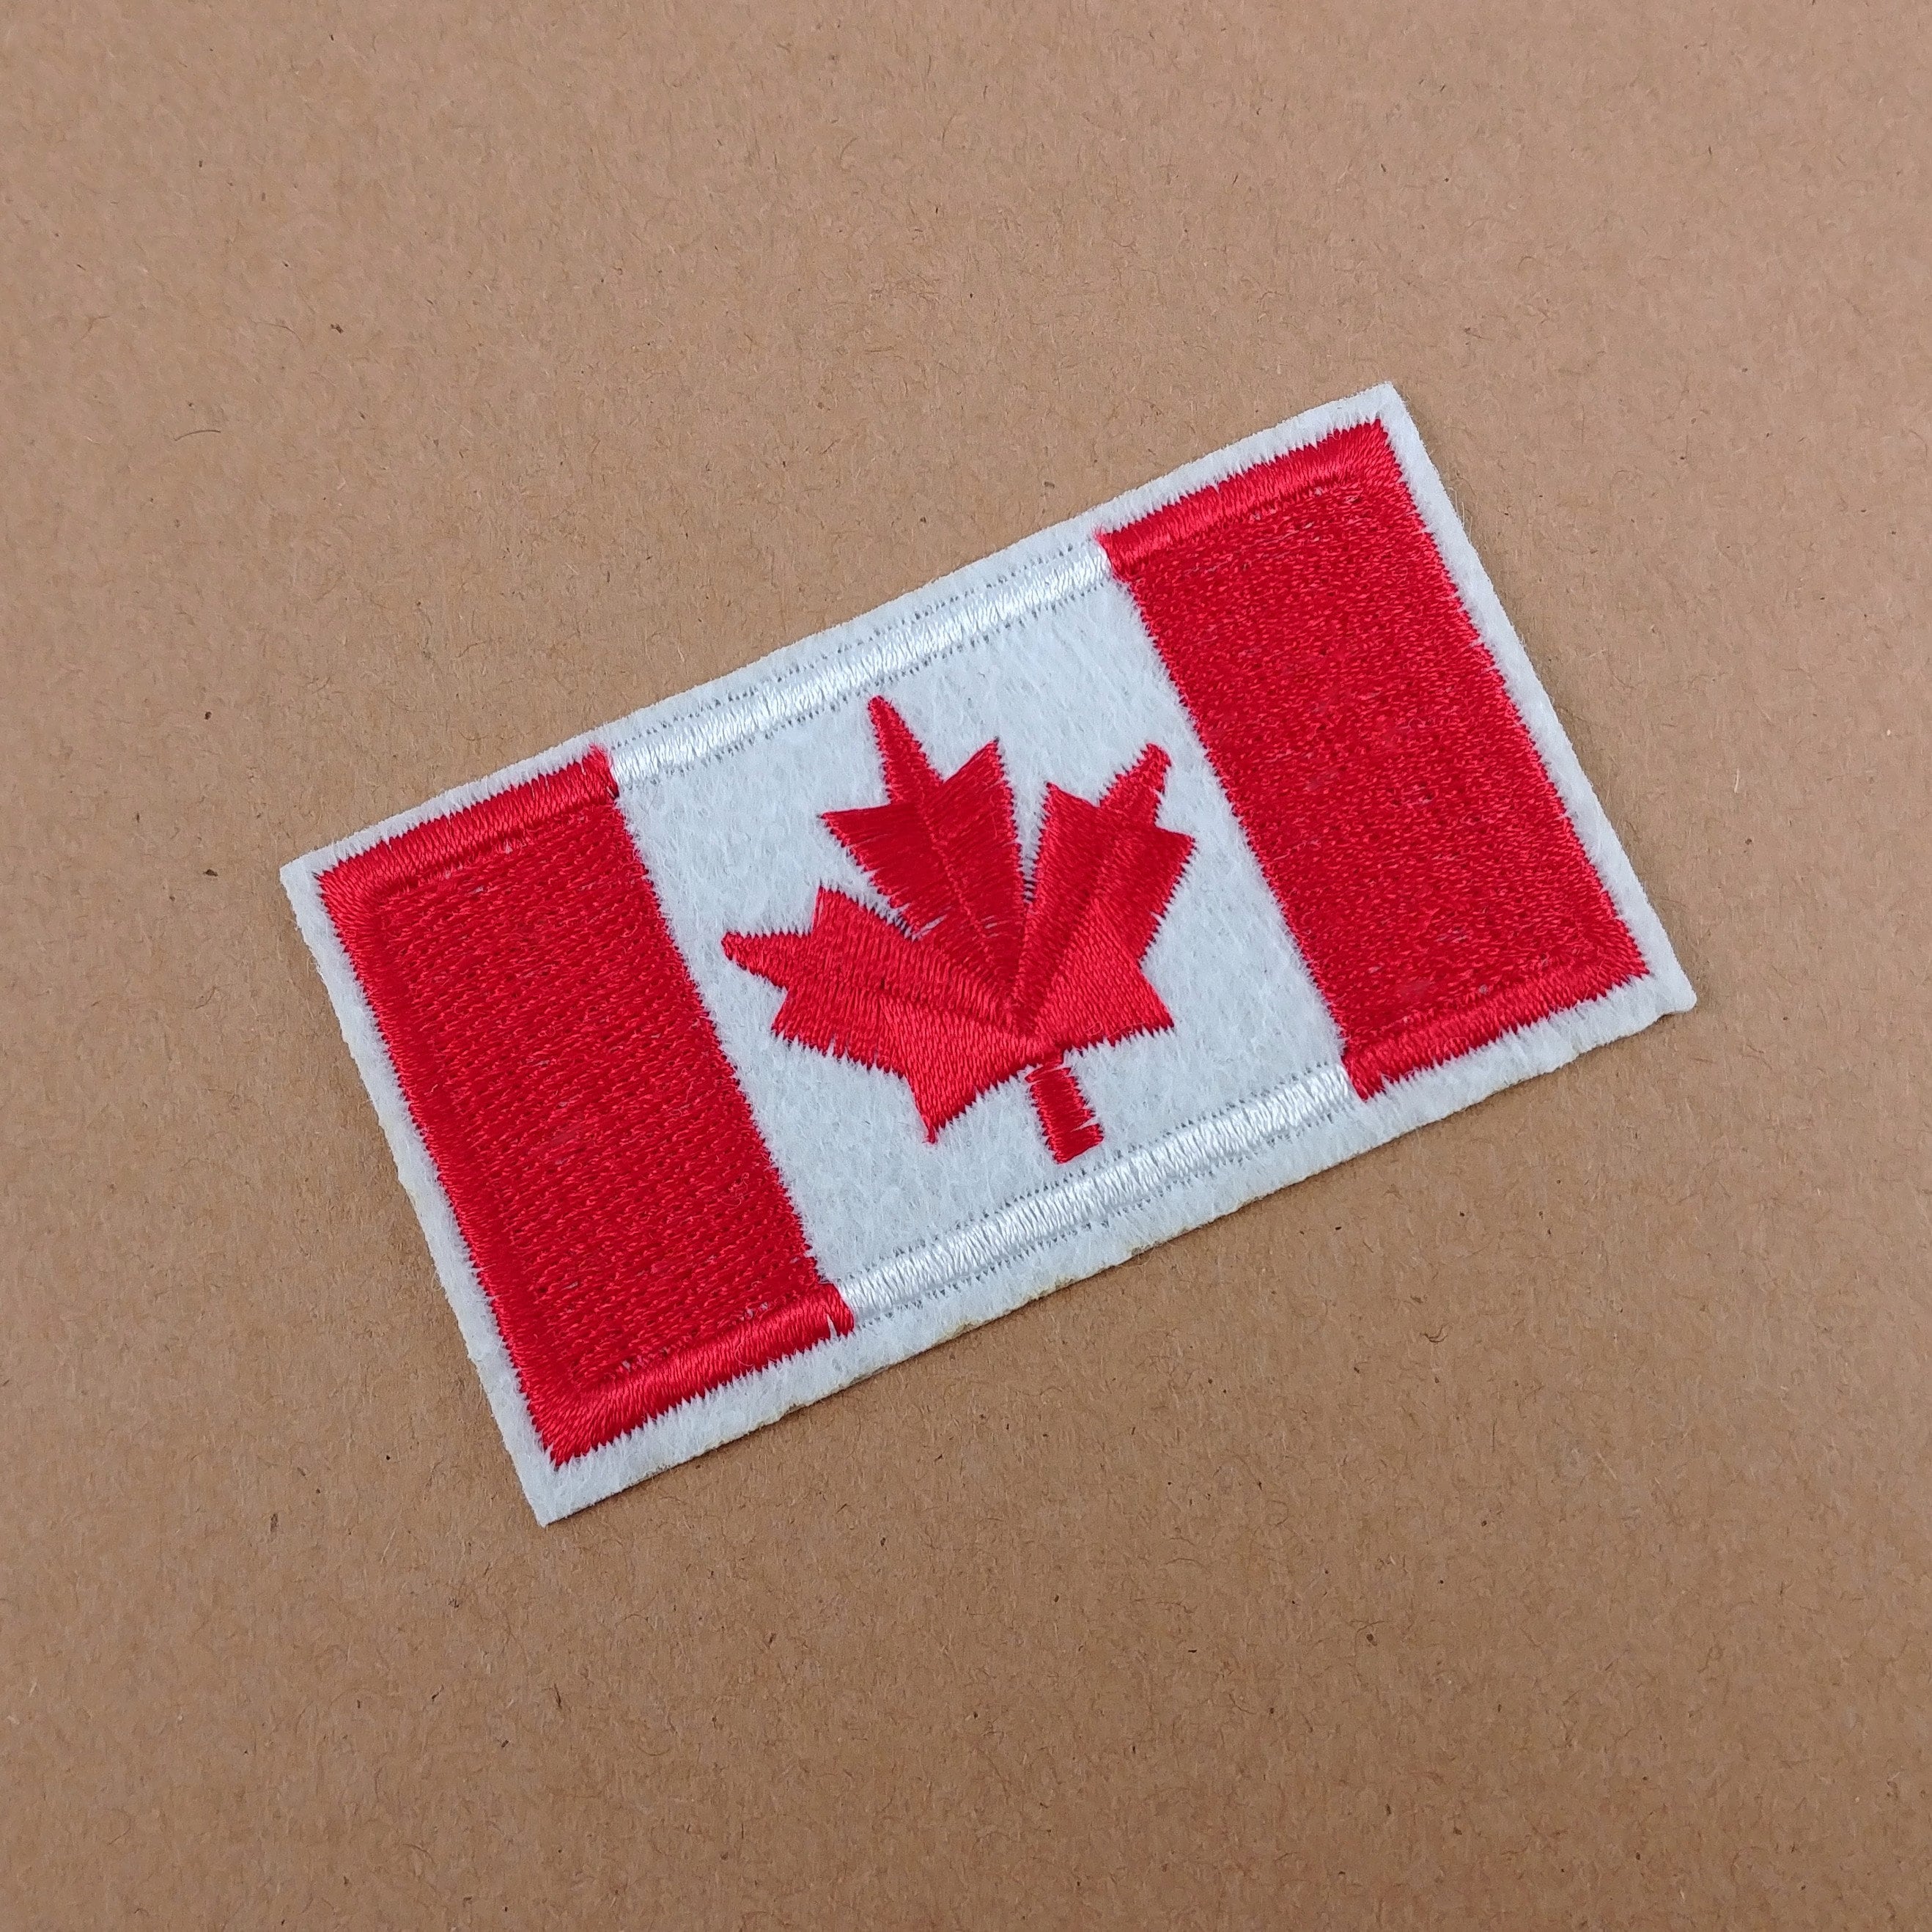 Canada iron on patches, Embroidered patch, Sew on patch, Canadian flag applique